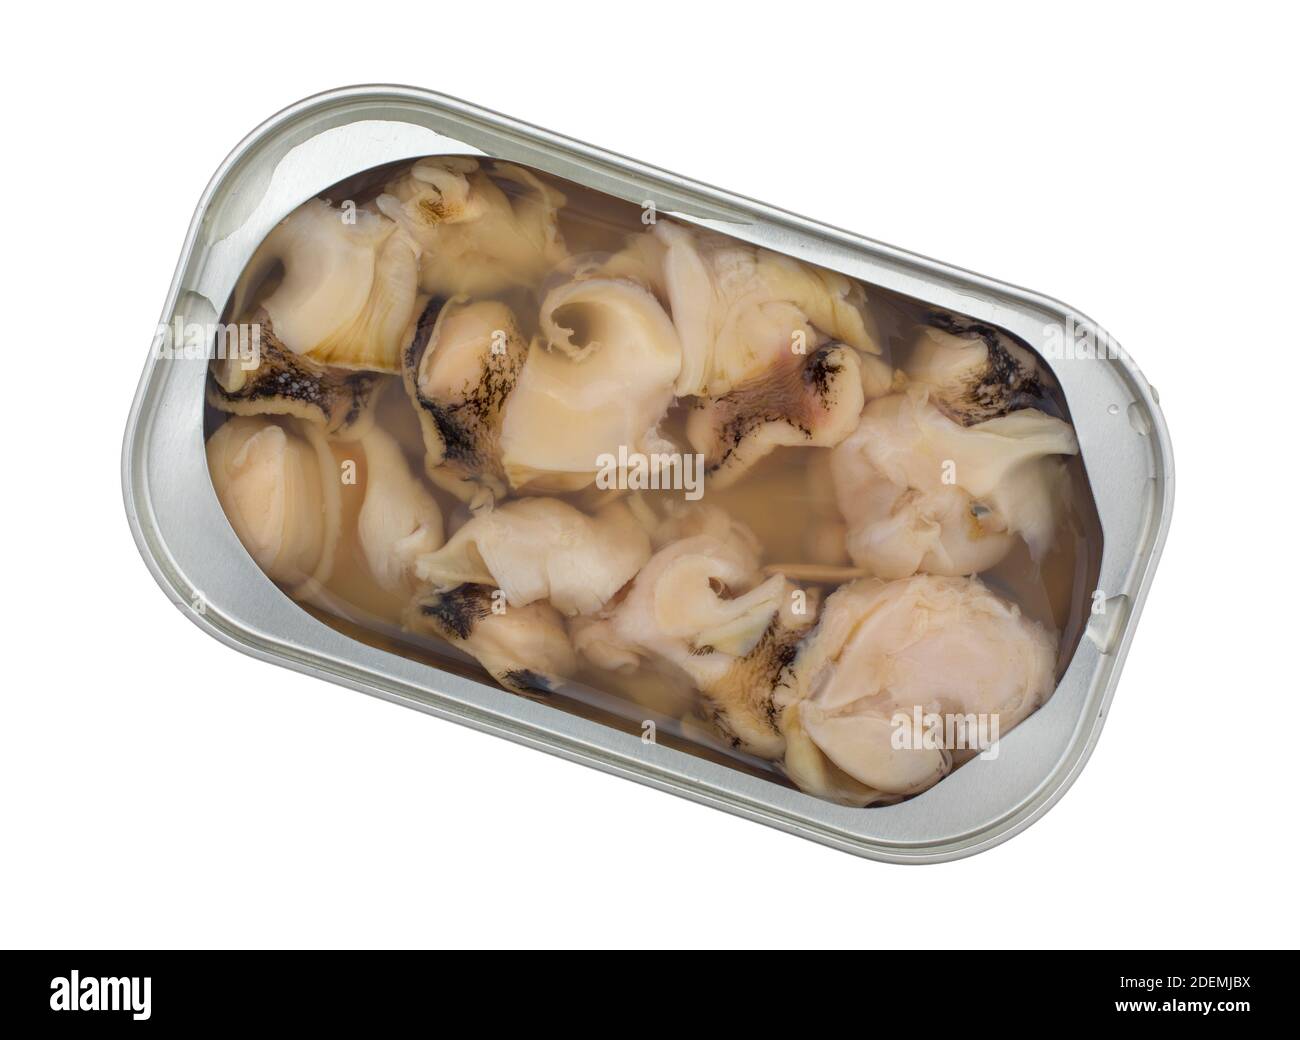 Top view of cooked conch snails in an open tin on a white background. Stock Photo